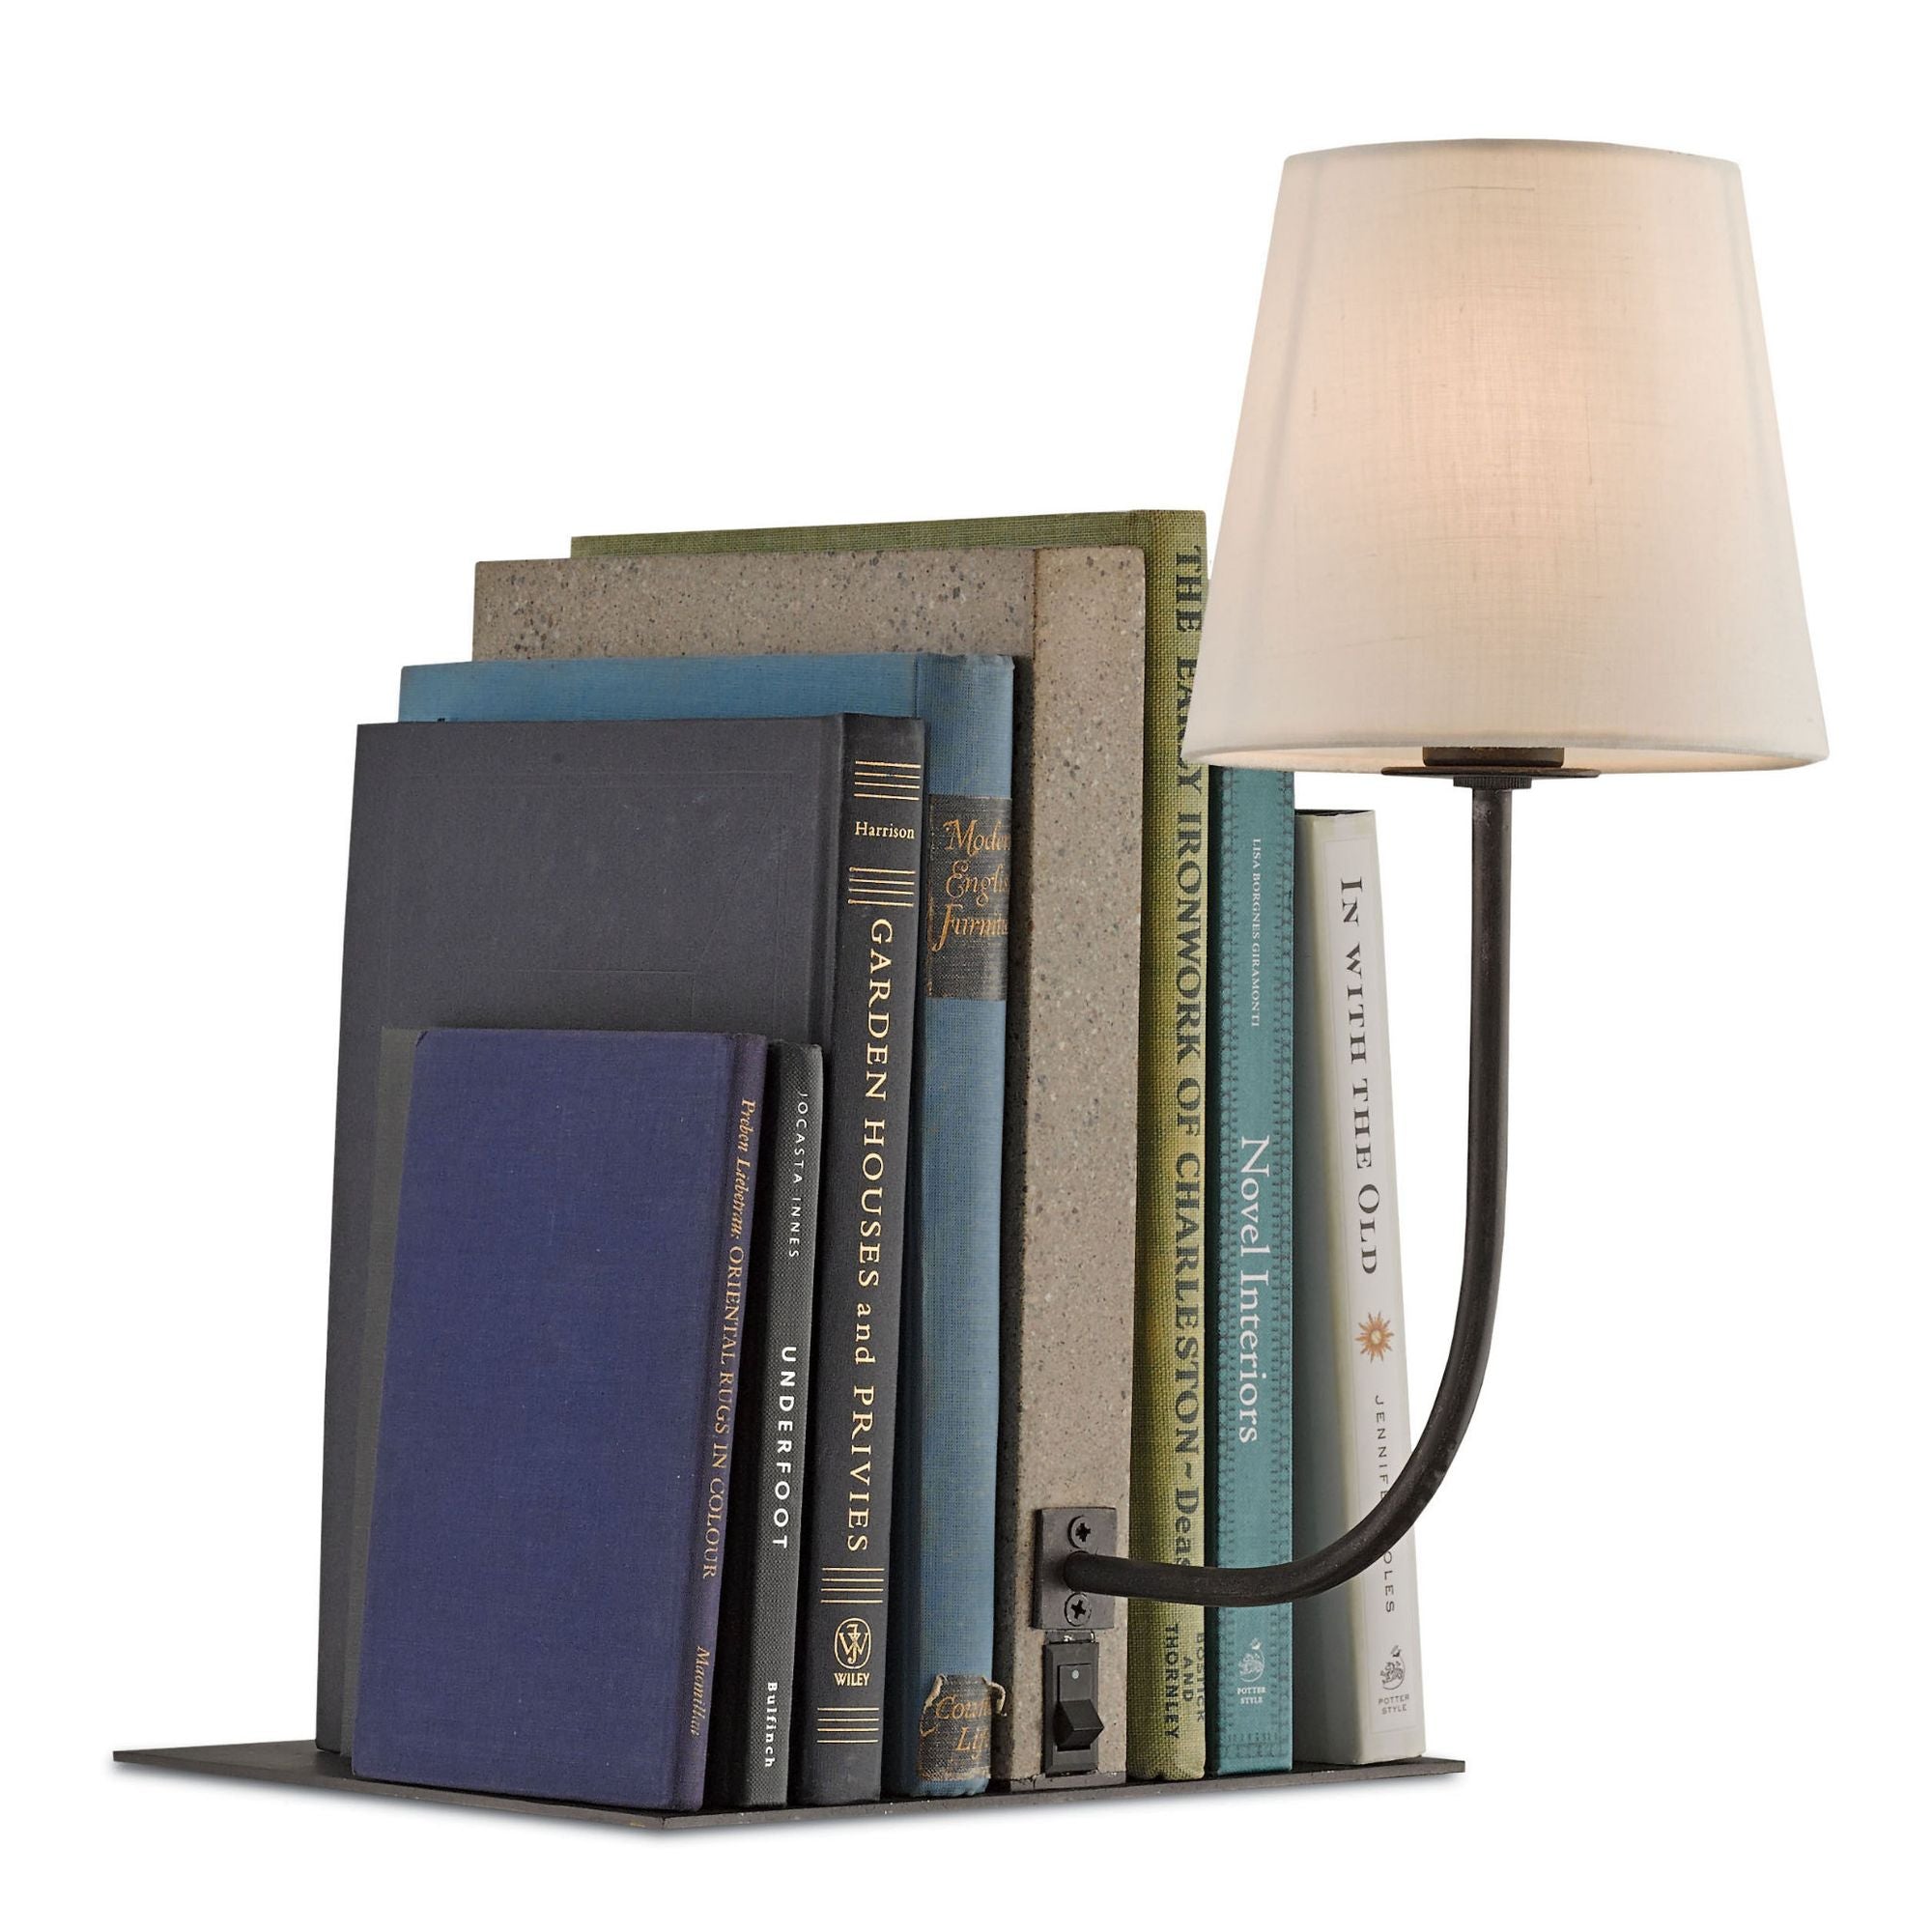 Oldknow Bookcase Lamp - Polished Concrete/Aged Steel